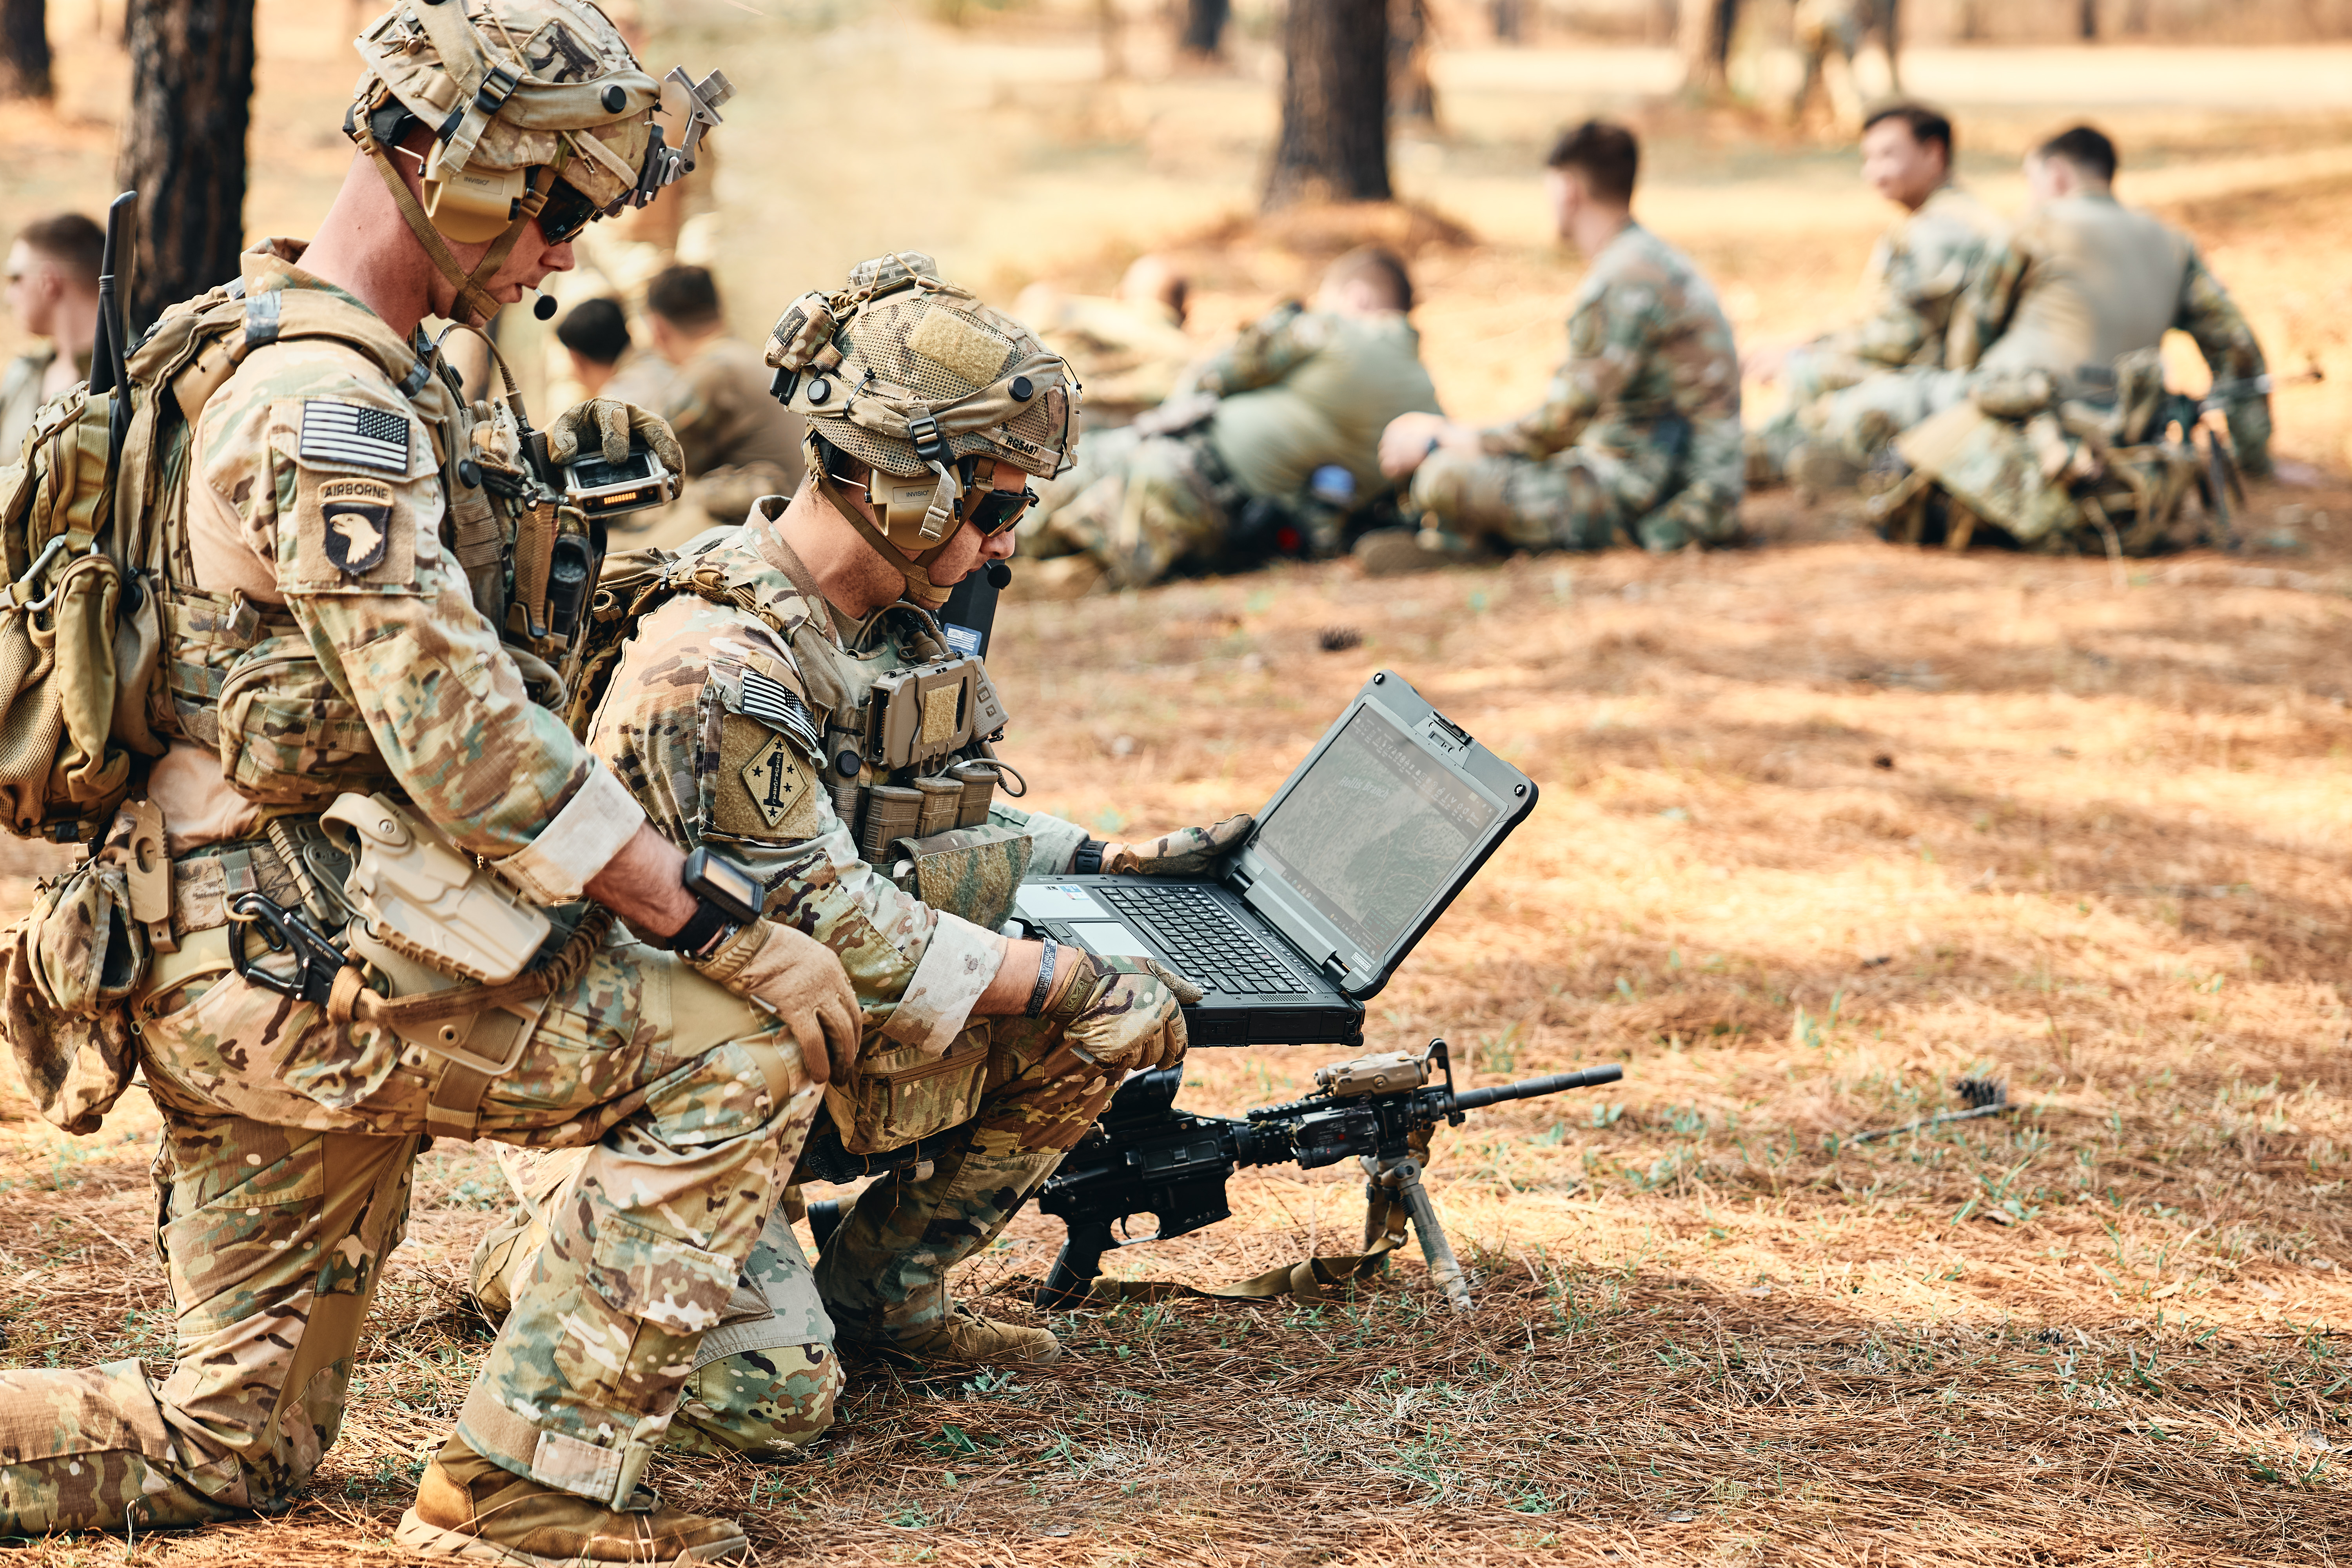 A soldier uses military technology in the field.